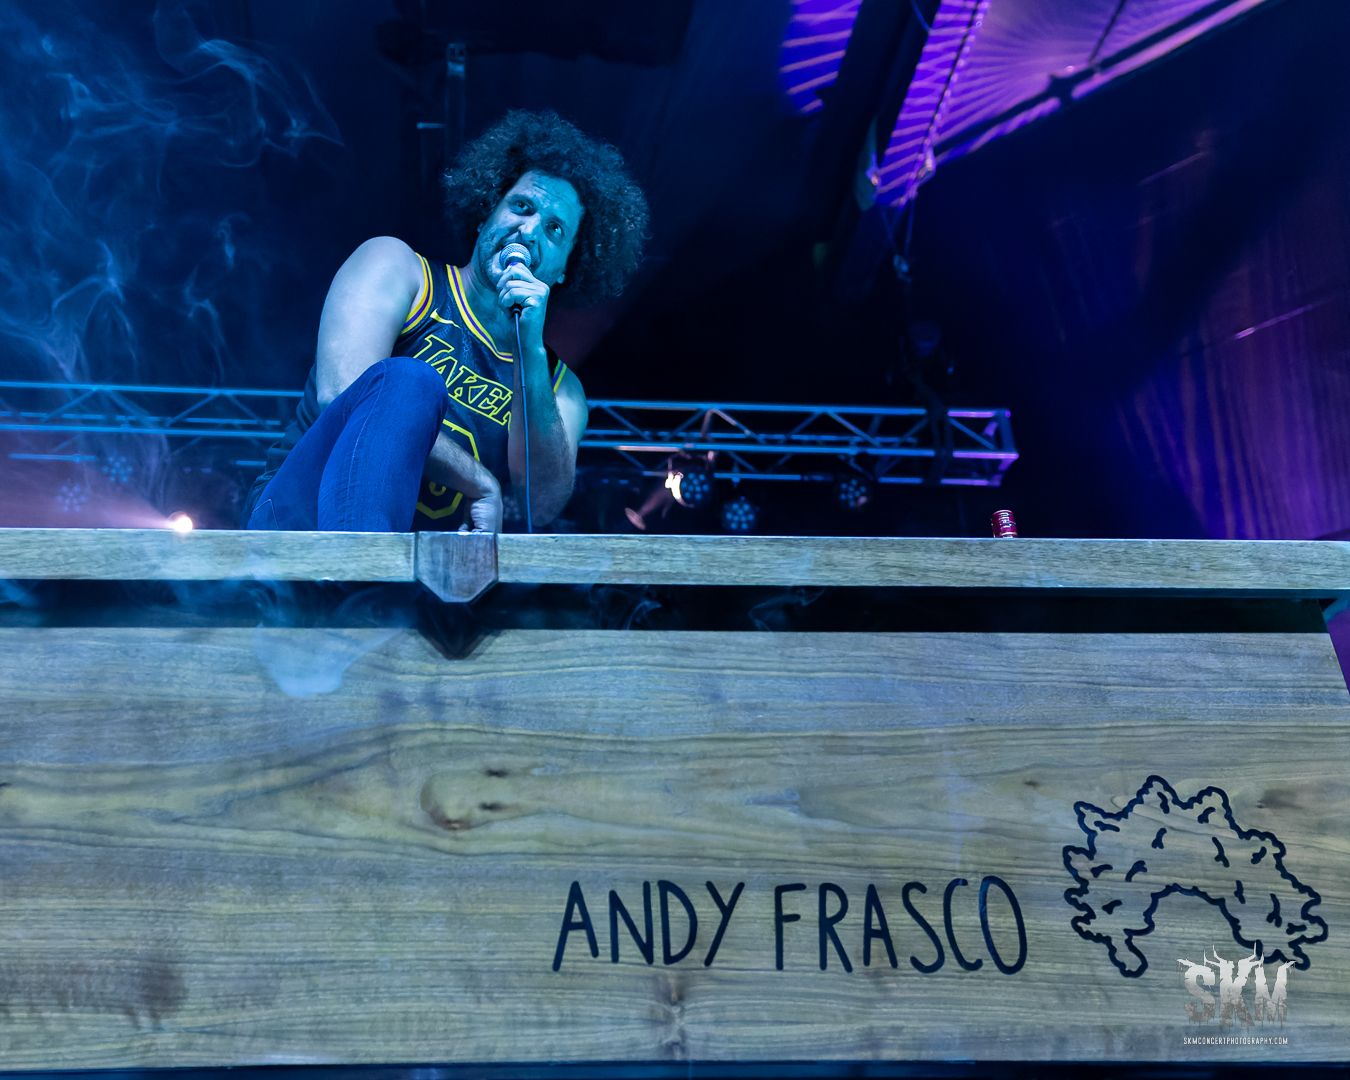 Andy Frasco & The U.N. Sell Out The Water Street Music Hall In Rochester, NY